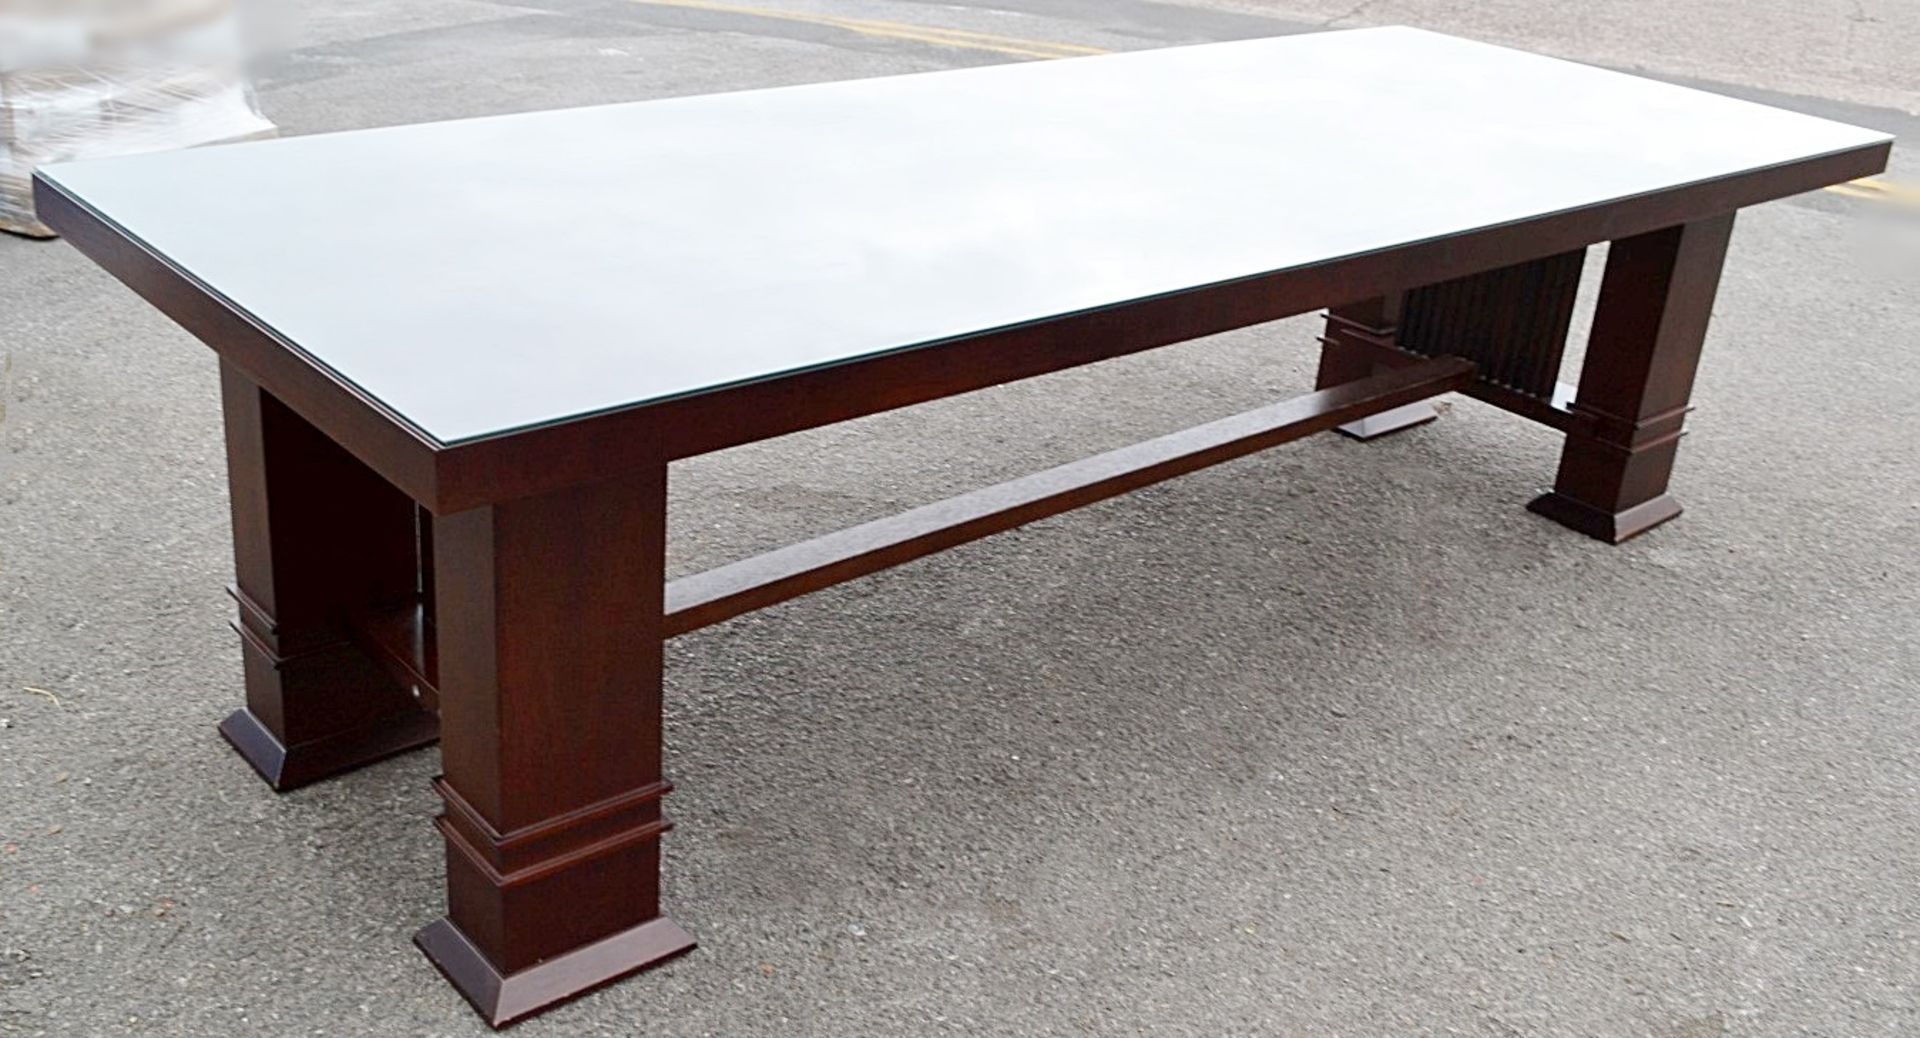 1 x Large Wooden Dining Table In The Style Of Frank Lloyd Wright + 8 x Dining Armchairs - NO VAT - Image 8 of 19